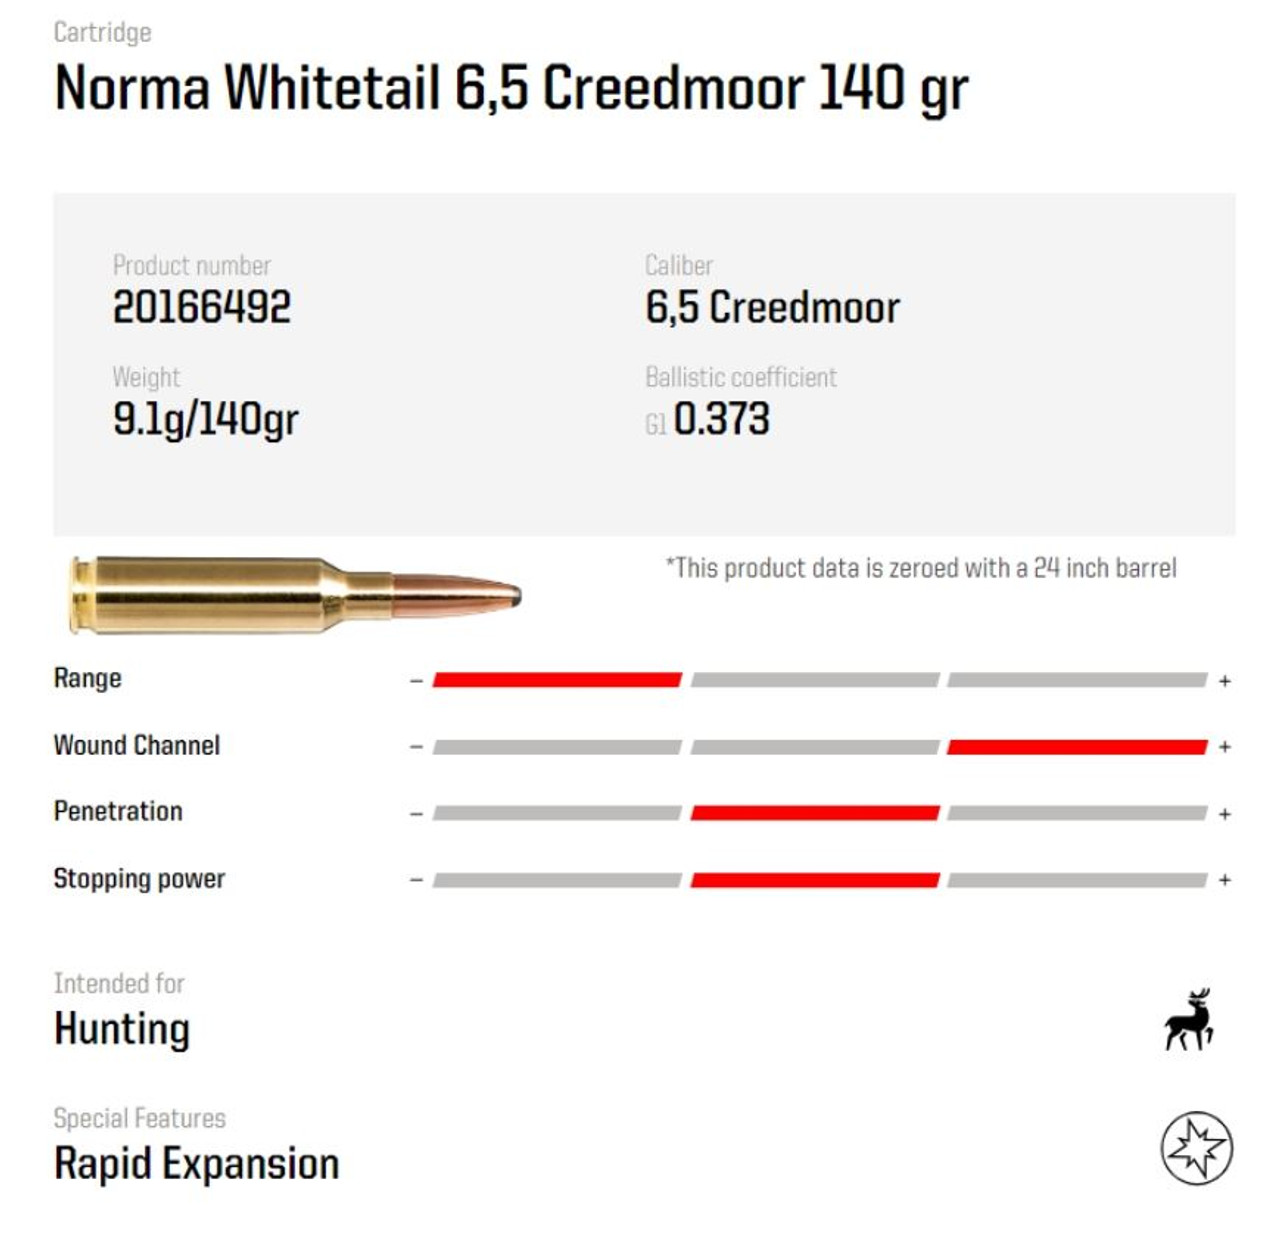 Ammo Norma Whitetail 140gr 6.5 CR 20 rounds